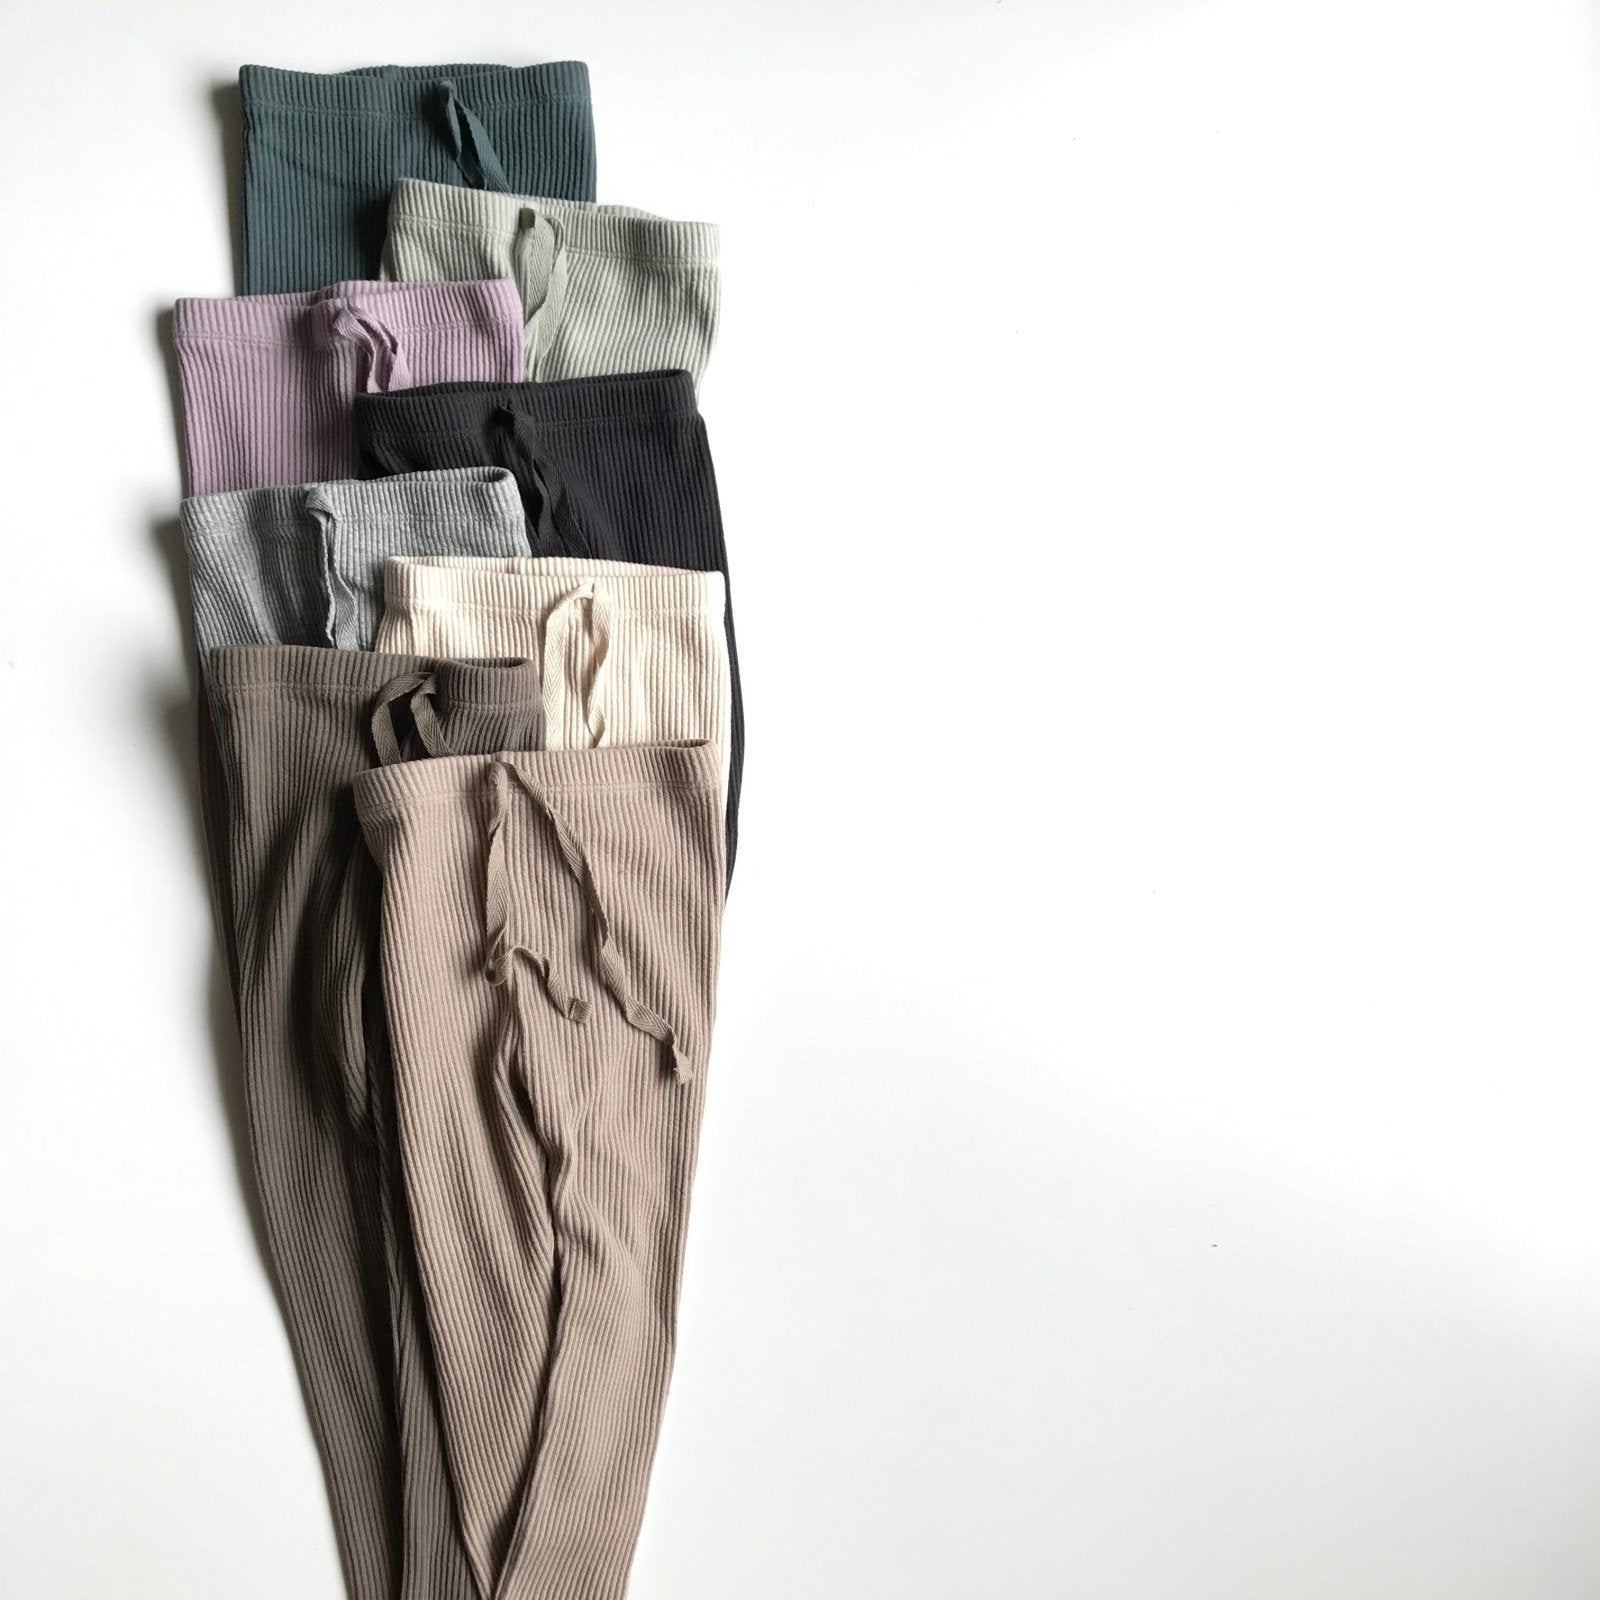 Marvi Rib Leggings find Stylish Fashion for Little People- at Little Foxx Concept Store